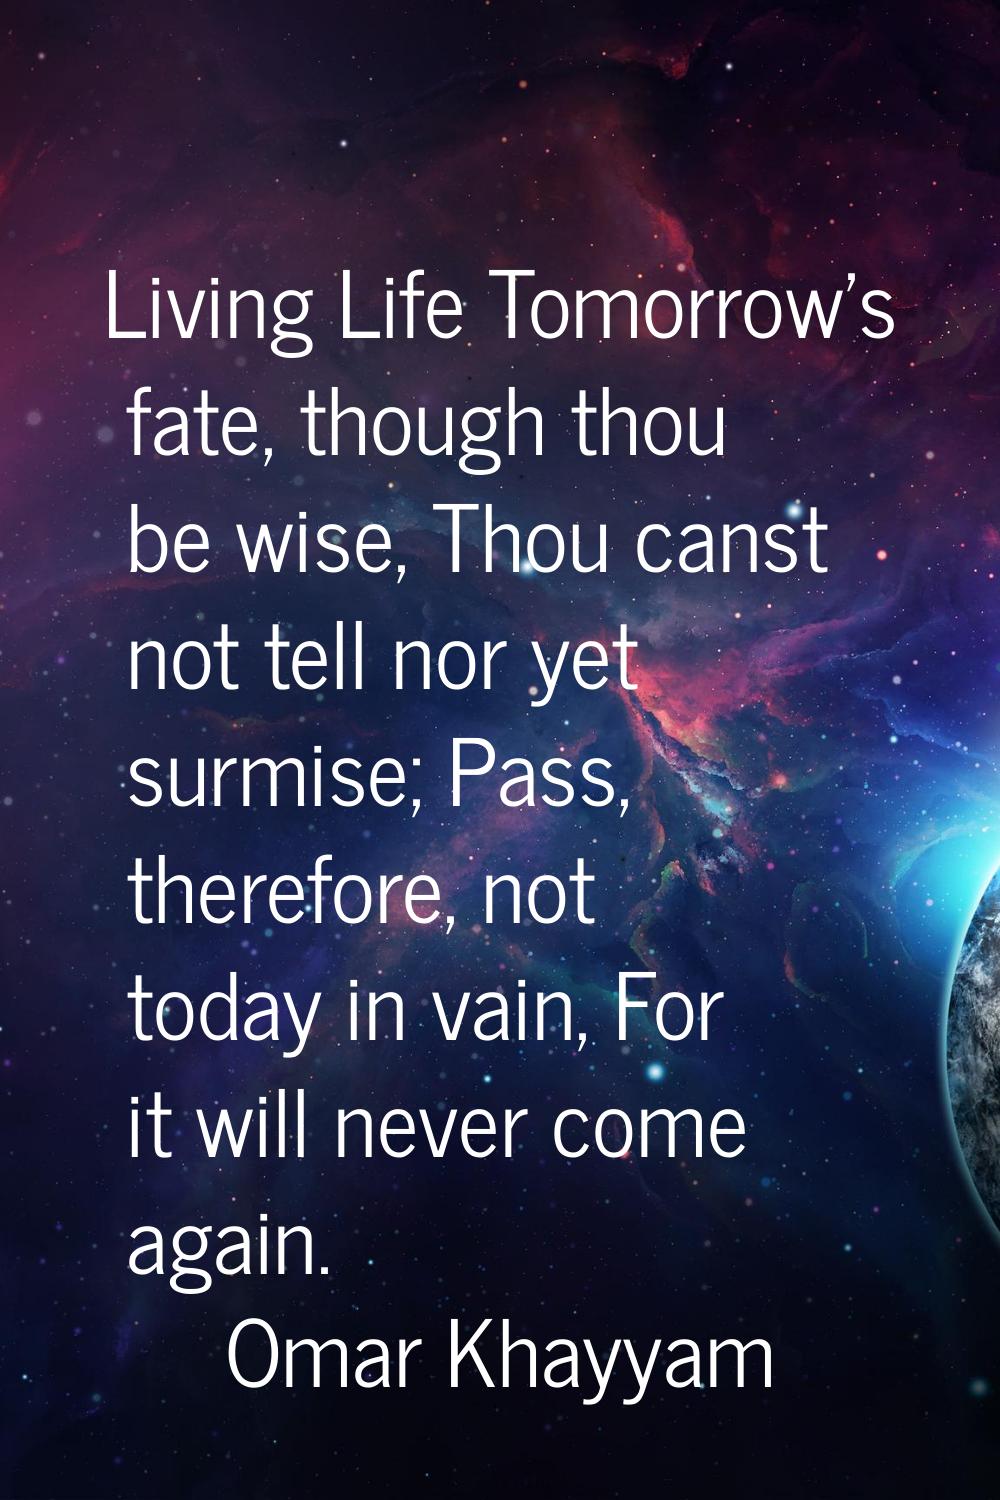 Living Life Tomorrow's fate, though thou be wise, Thou canst not tell nor yet surmise; Pass, theref